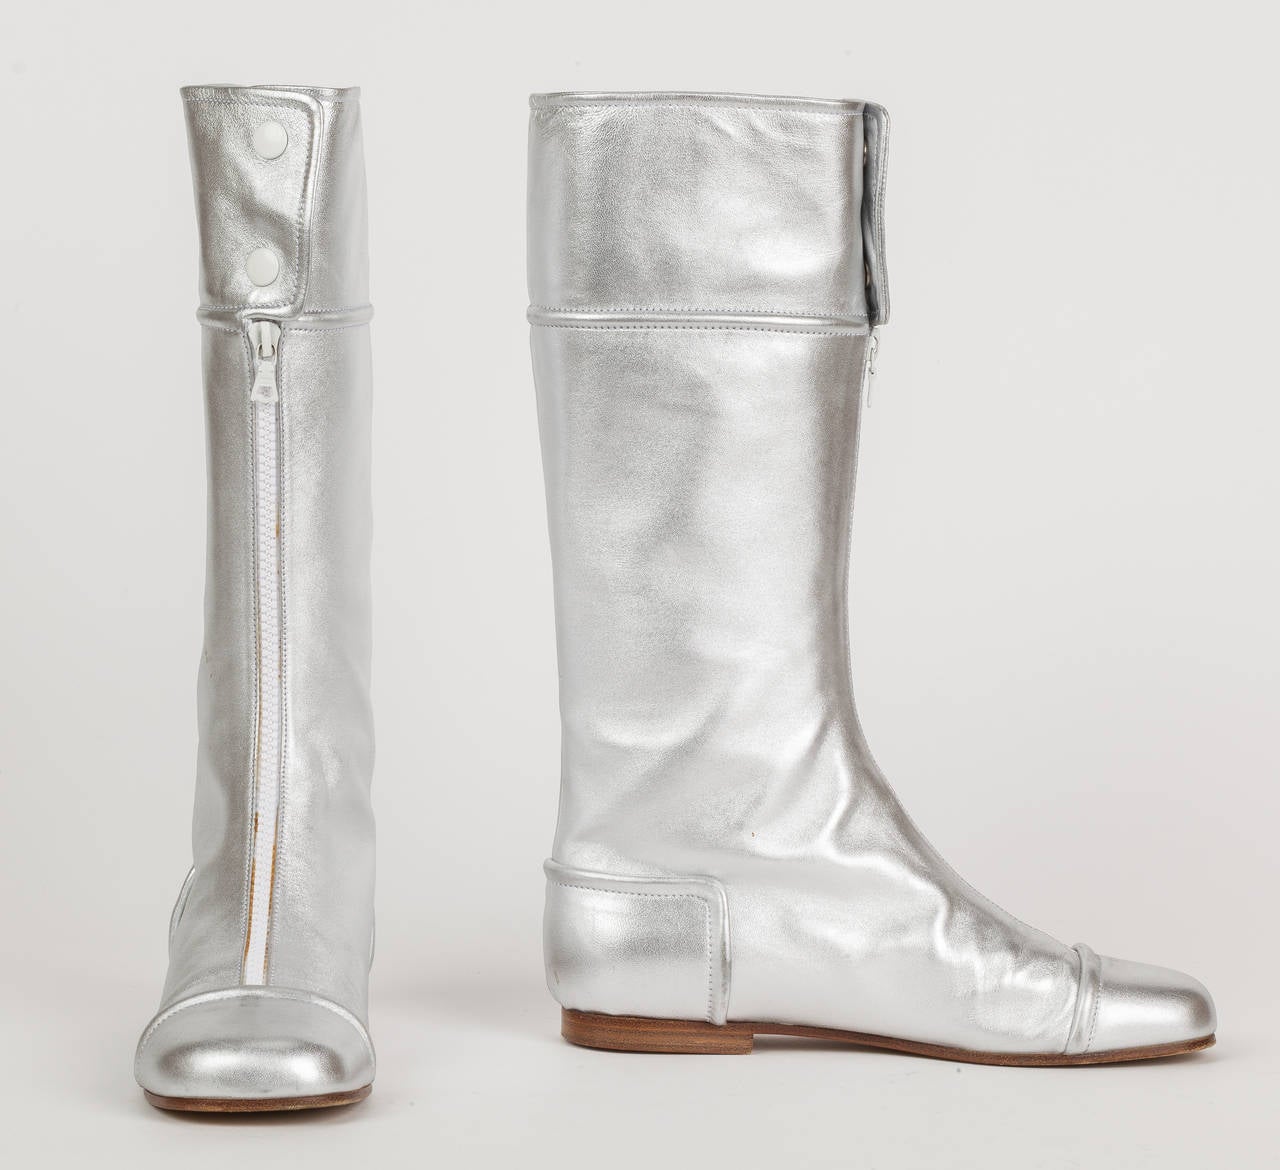 These boots are the 1990's Courreges 